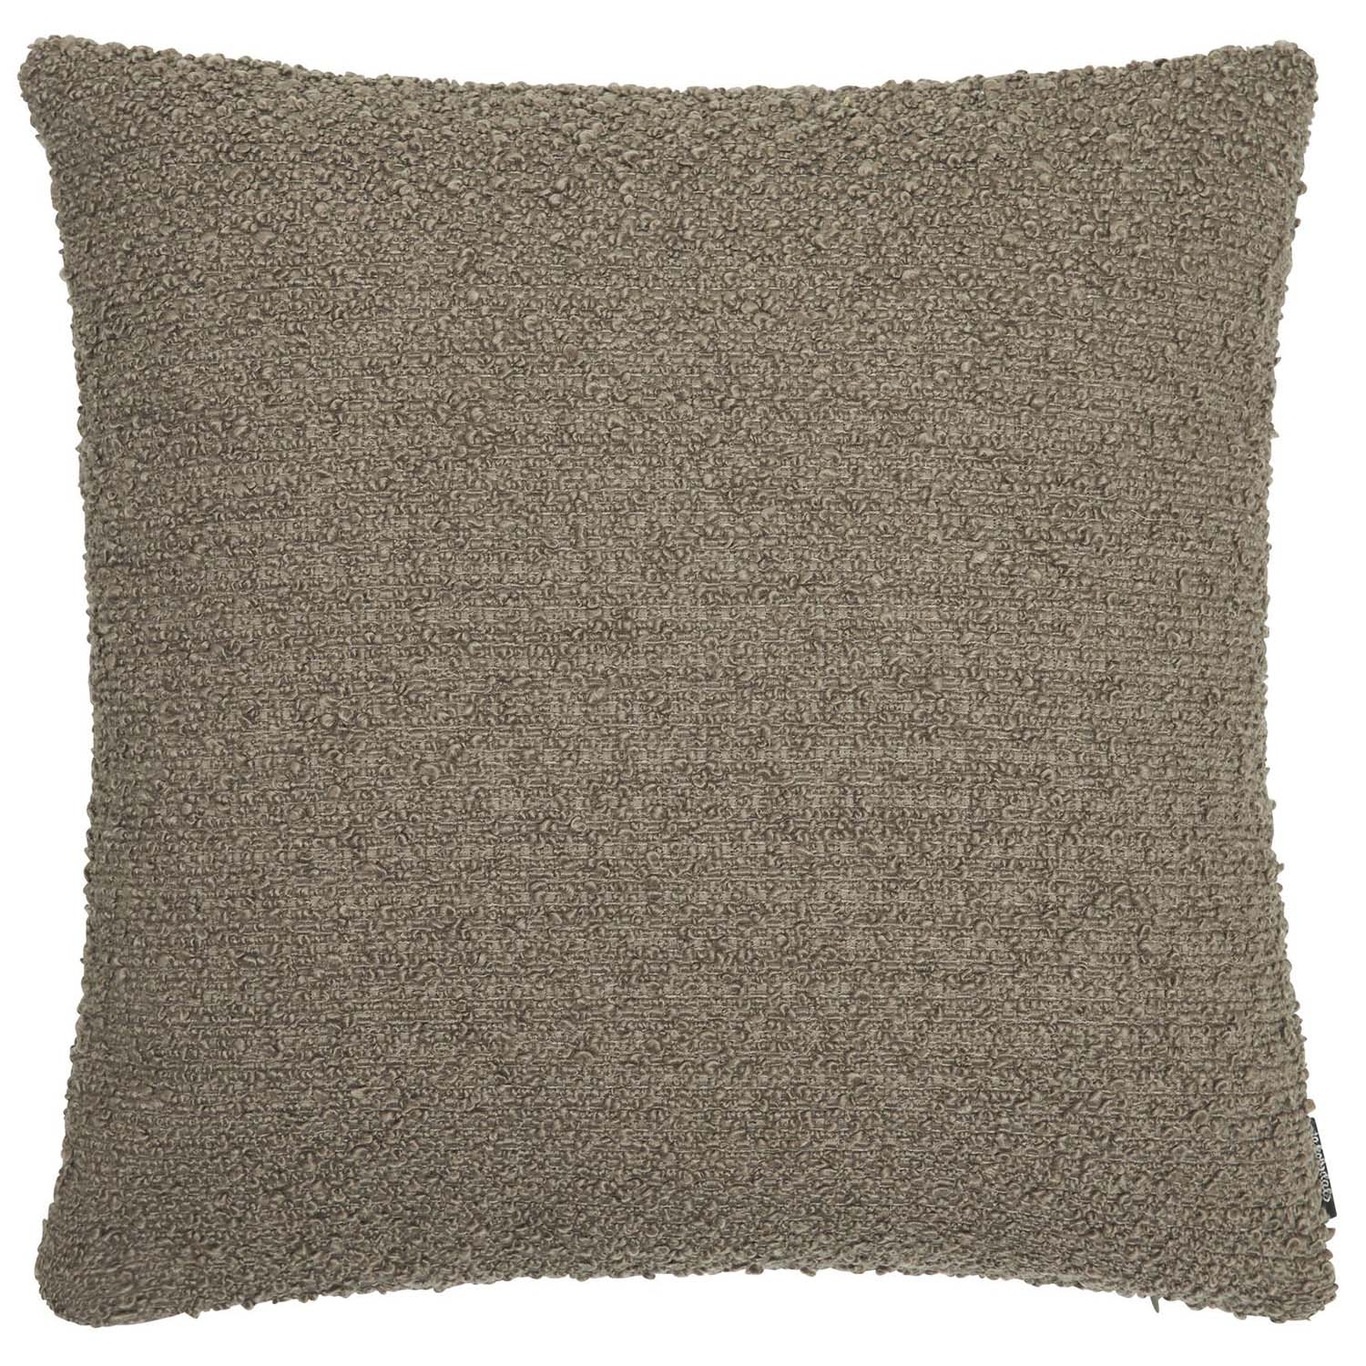 Boucle moment Cushion Cover 60X60 cm, Light Brown